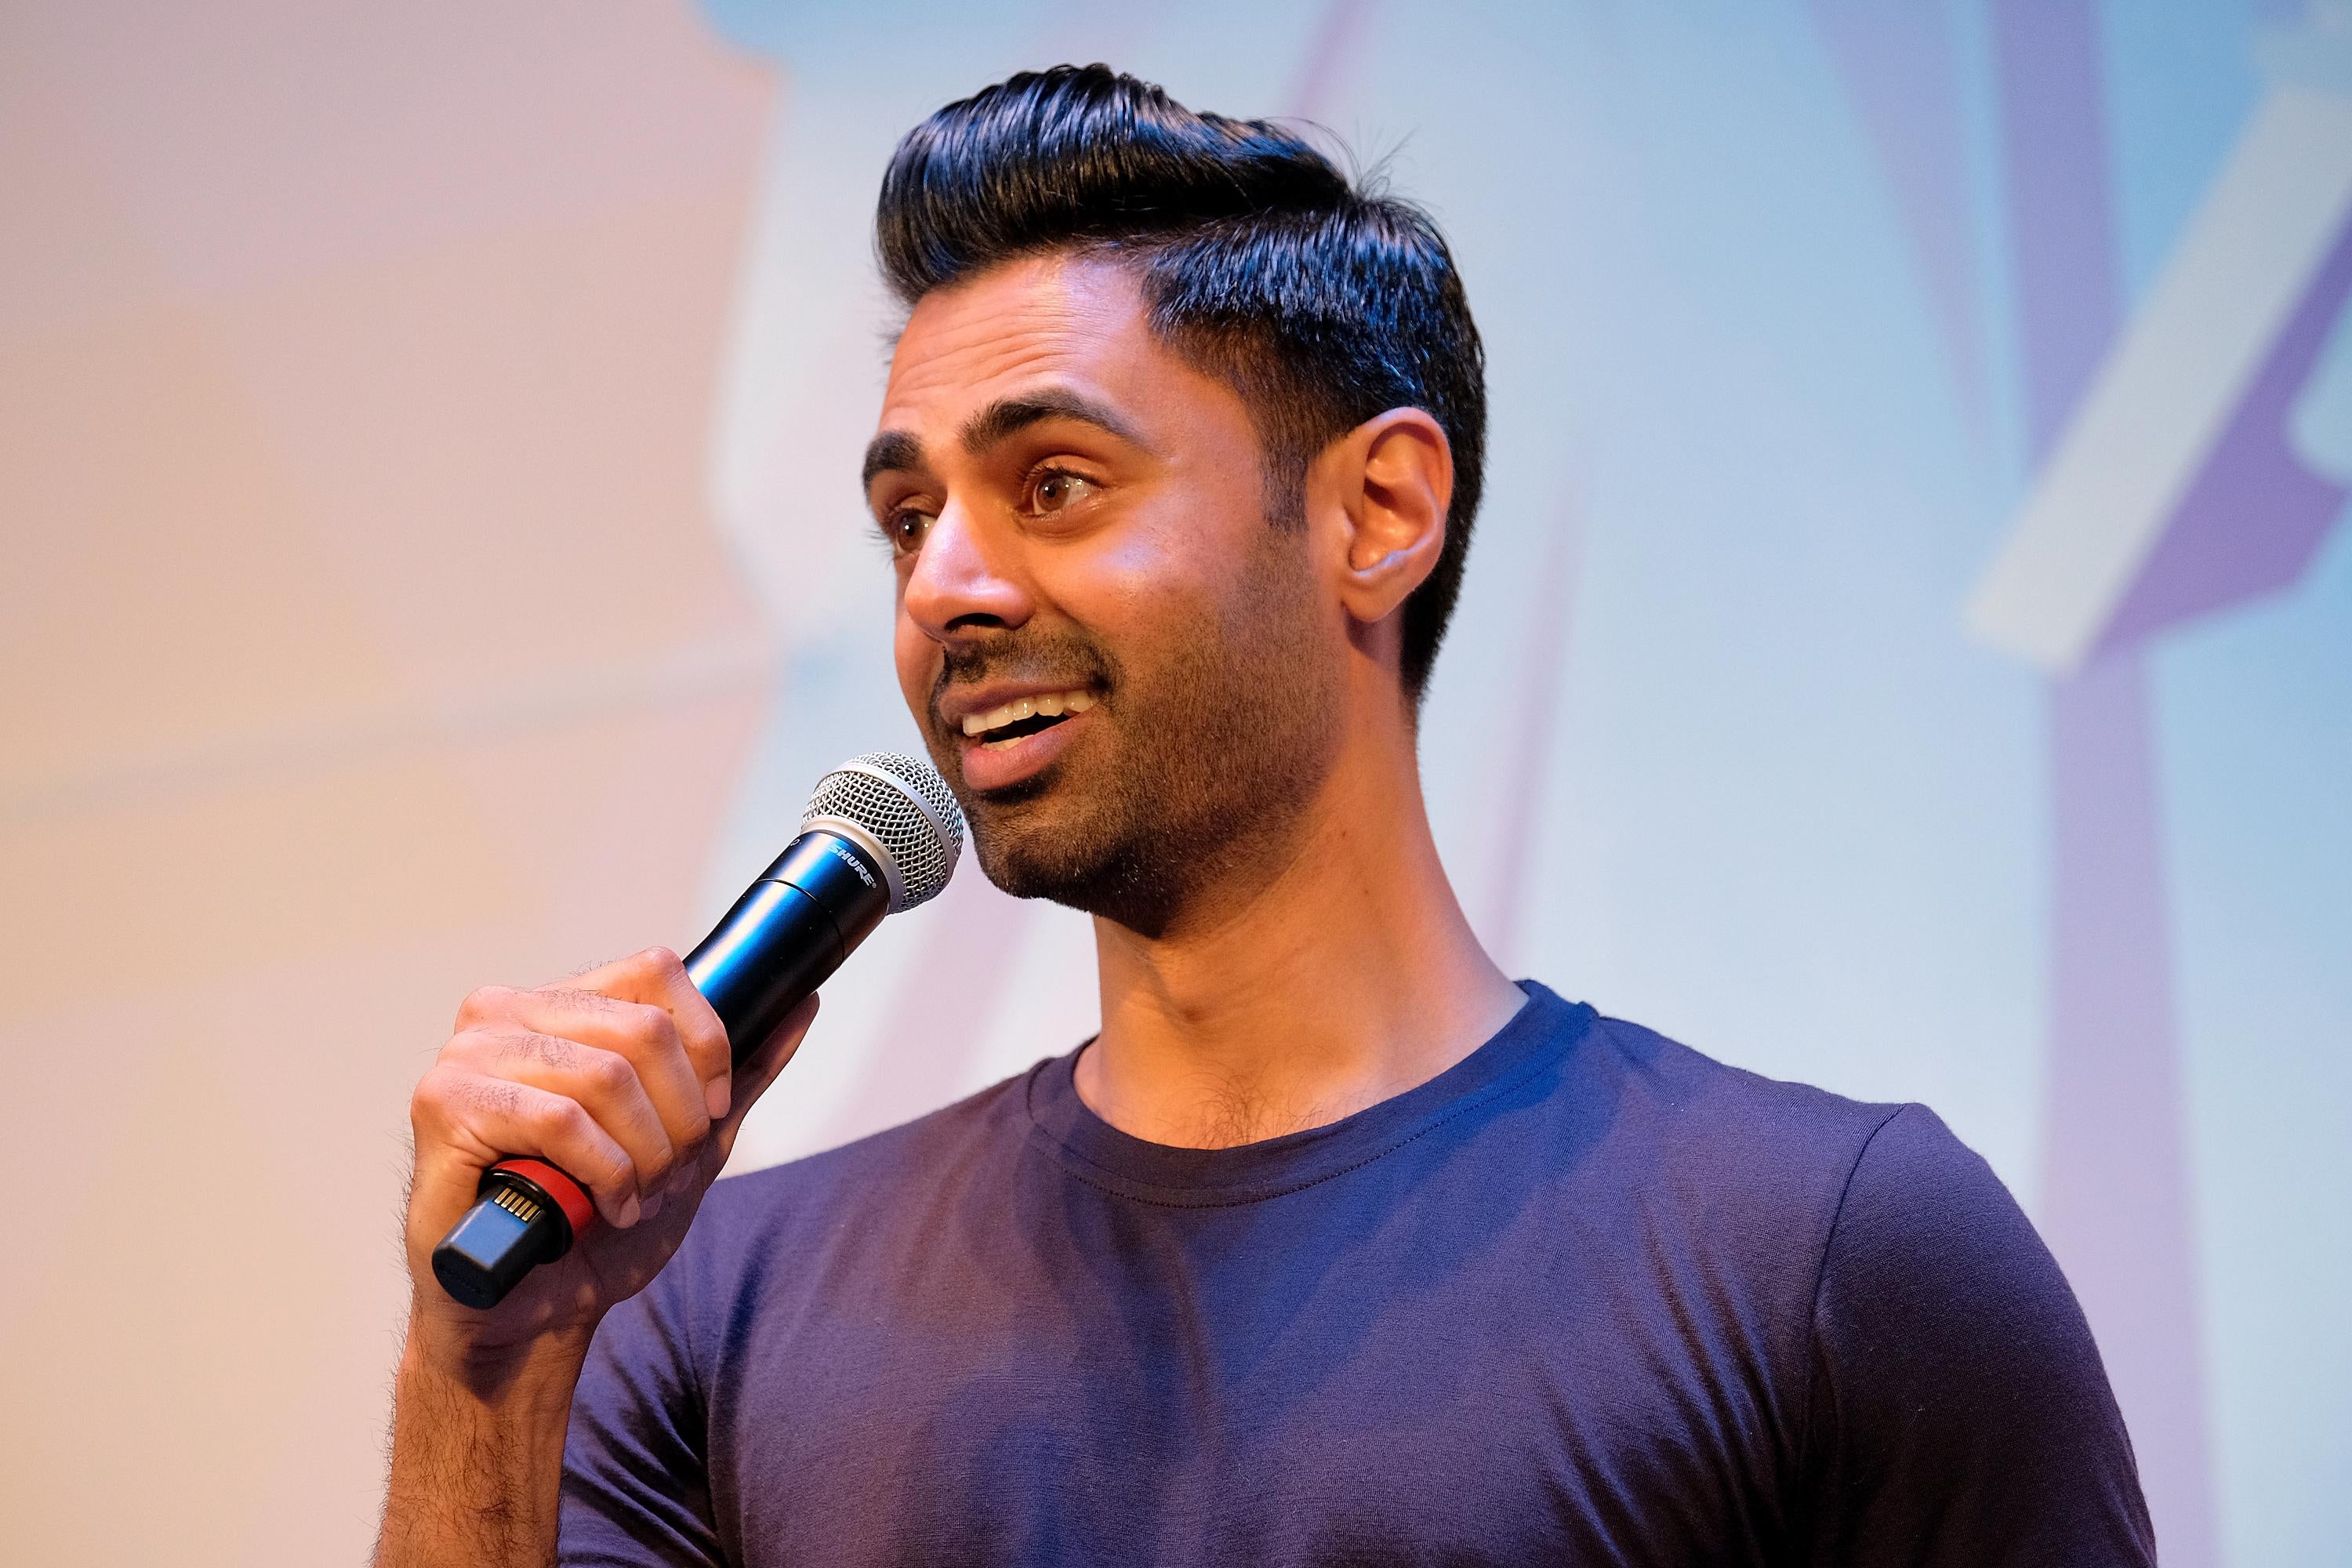 Hasan Minhaj performs onstage during OZY FEST 2018 at  Rumsey Playfield, Central Park on July 21, 2018 in New York City.  (Photo by Matthew Eisman/Getty Images for Ozy Media)